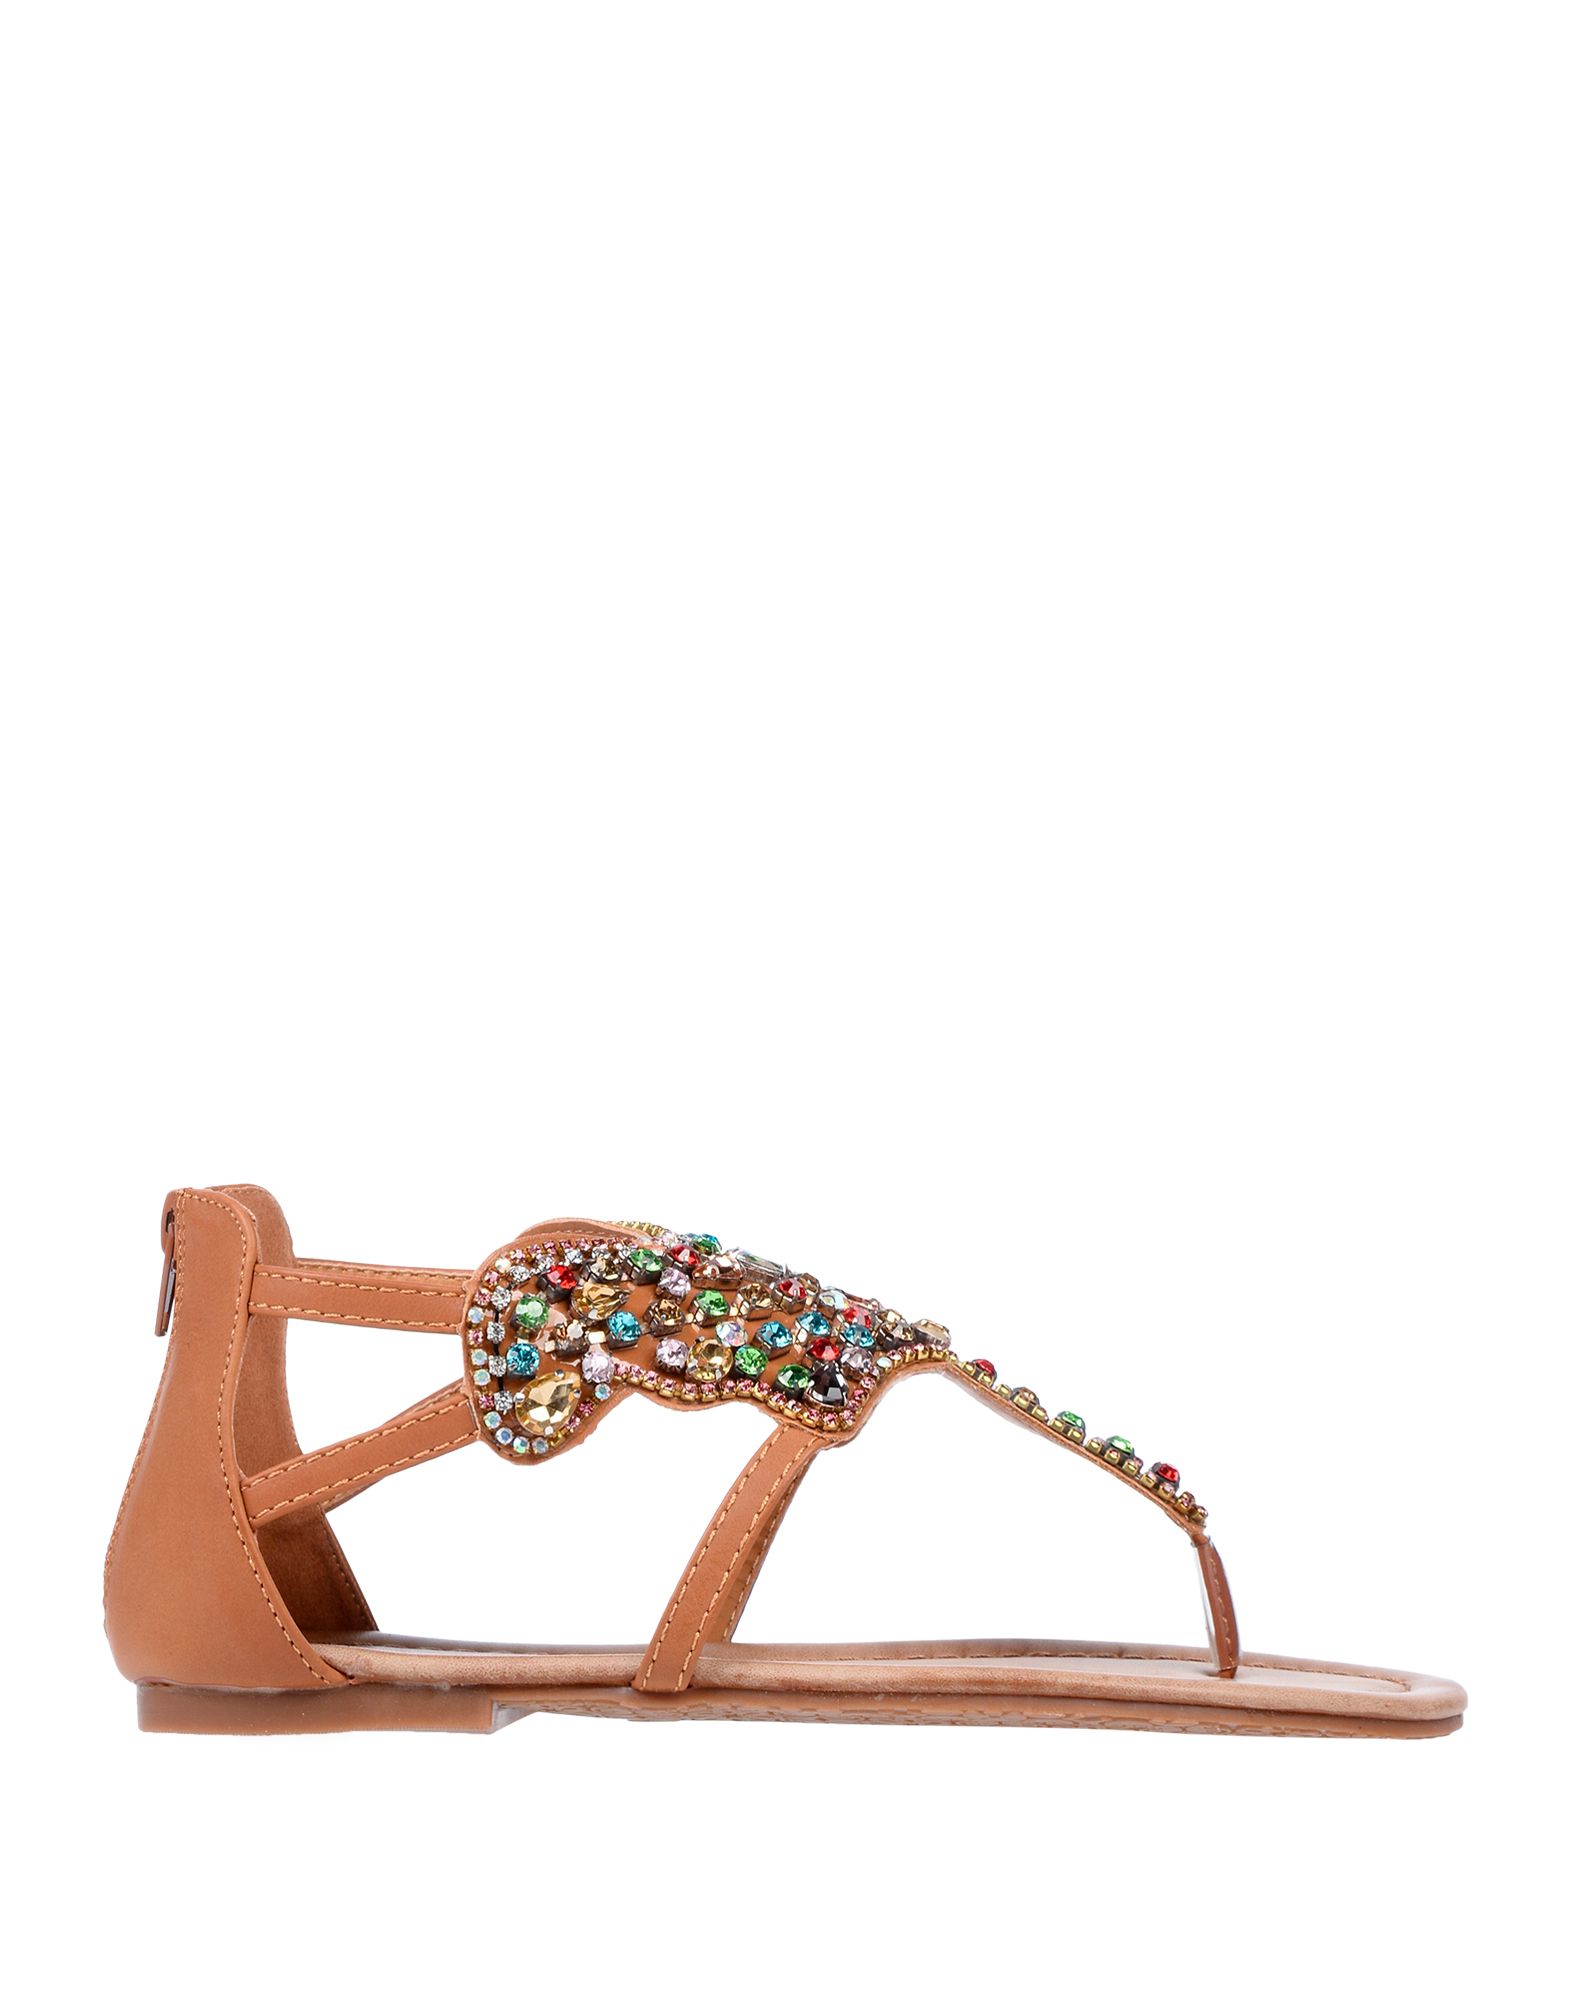 EXE' Toe strap sandals